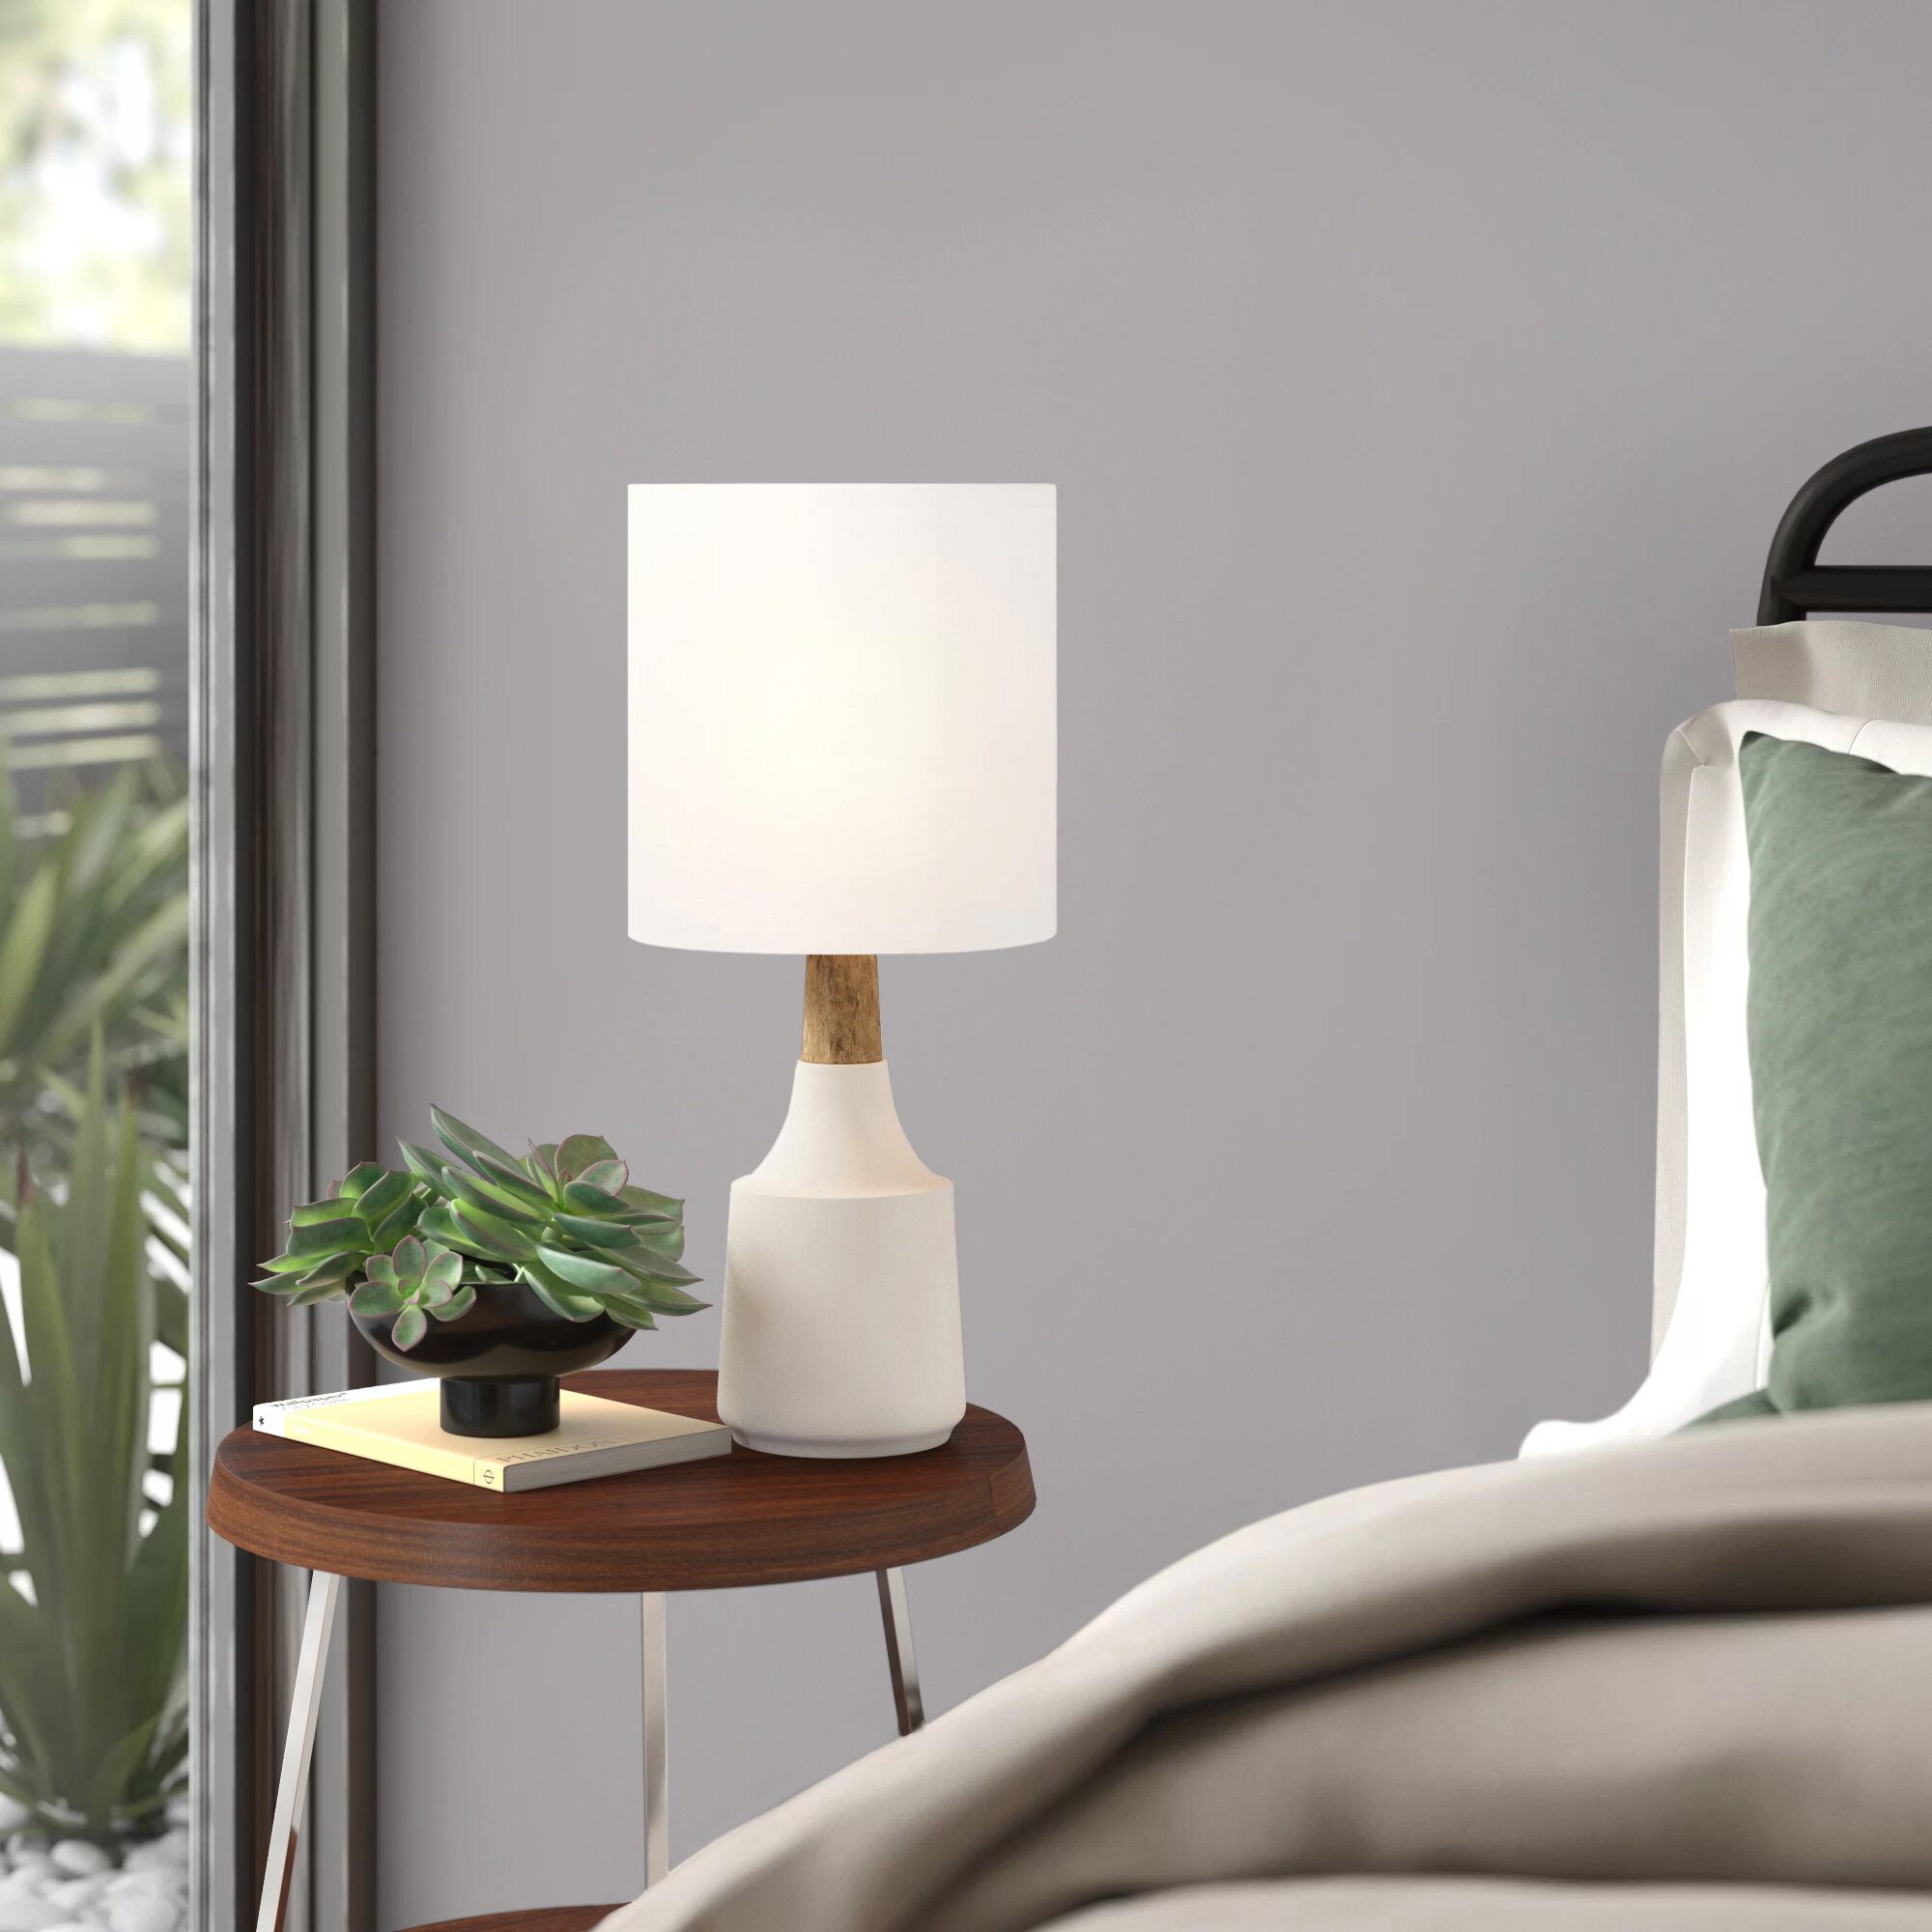 Contemporary Table Lamps For Bedroom - Modern Table Lamps Allmodern